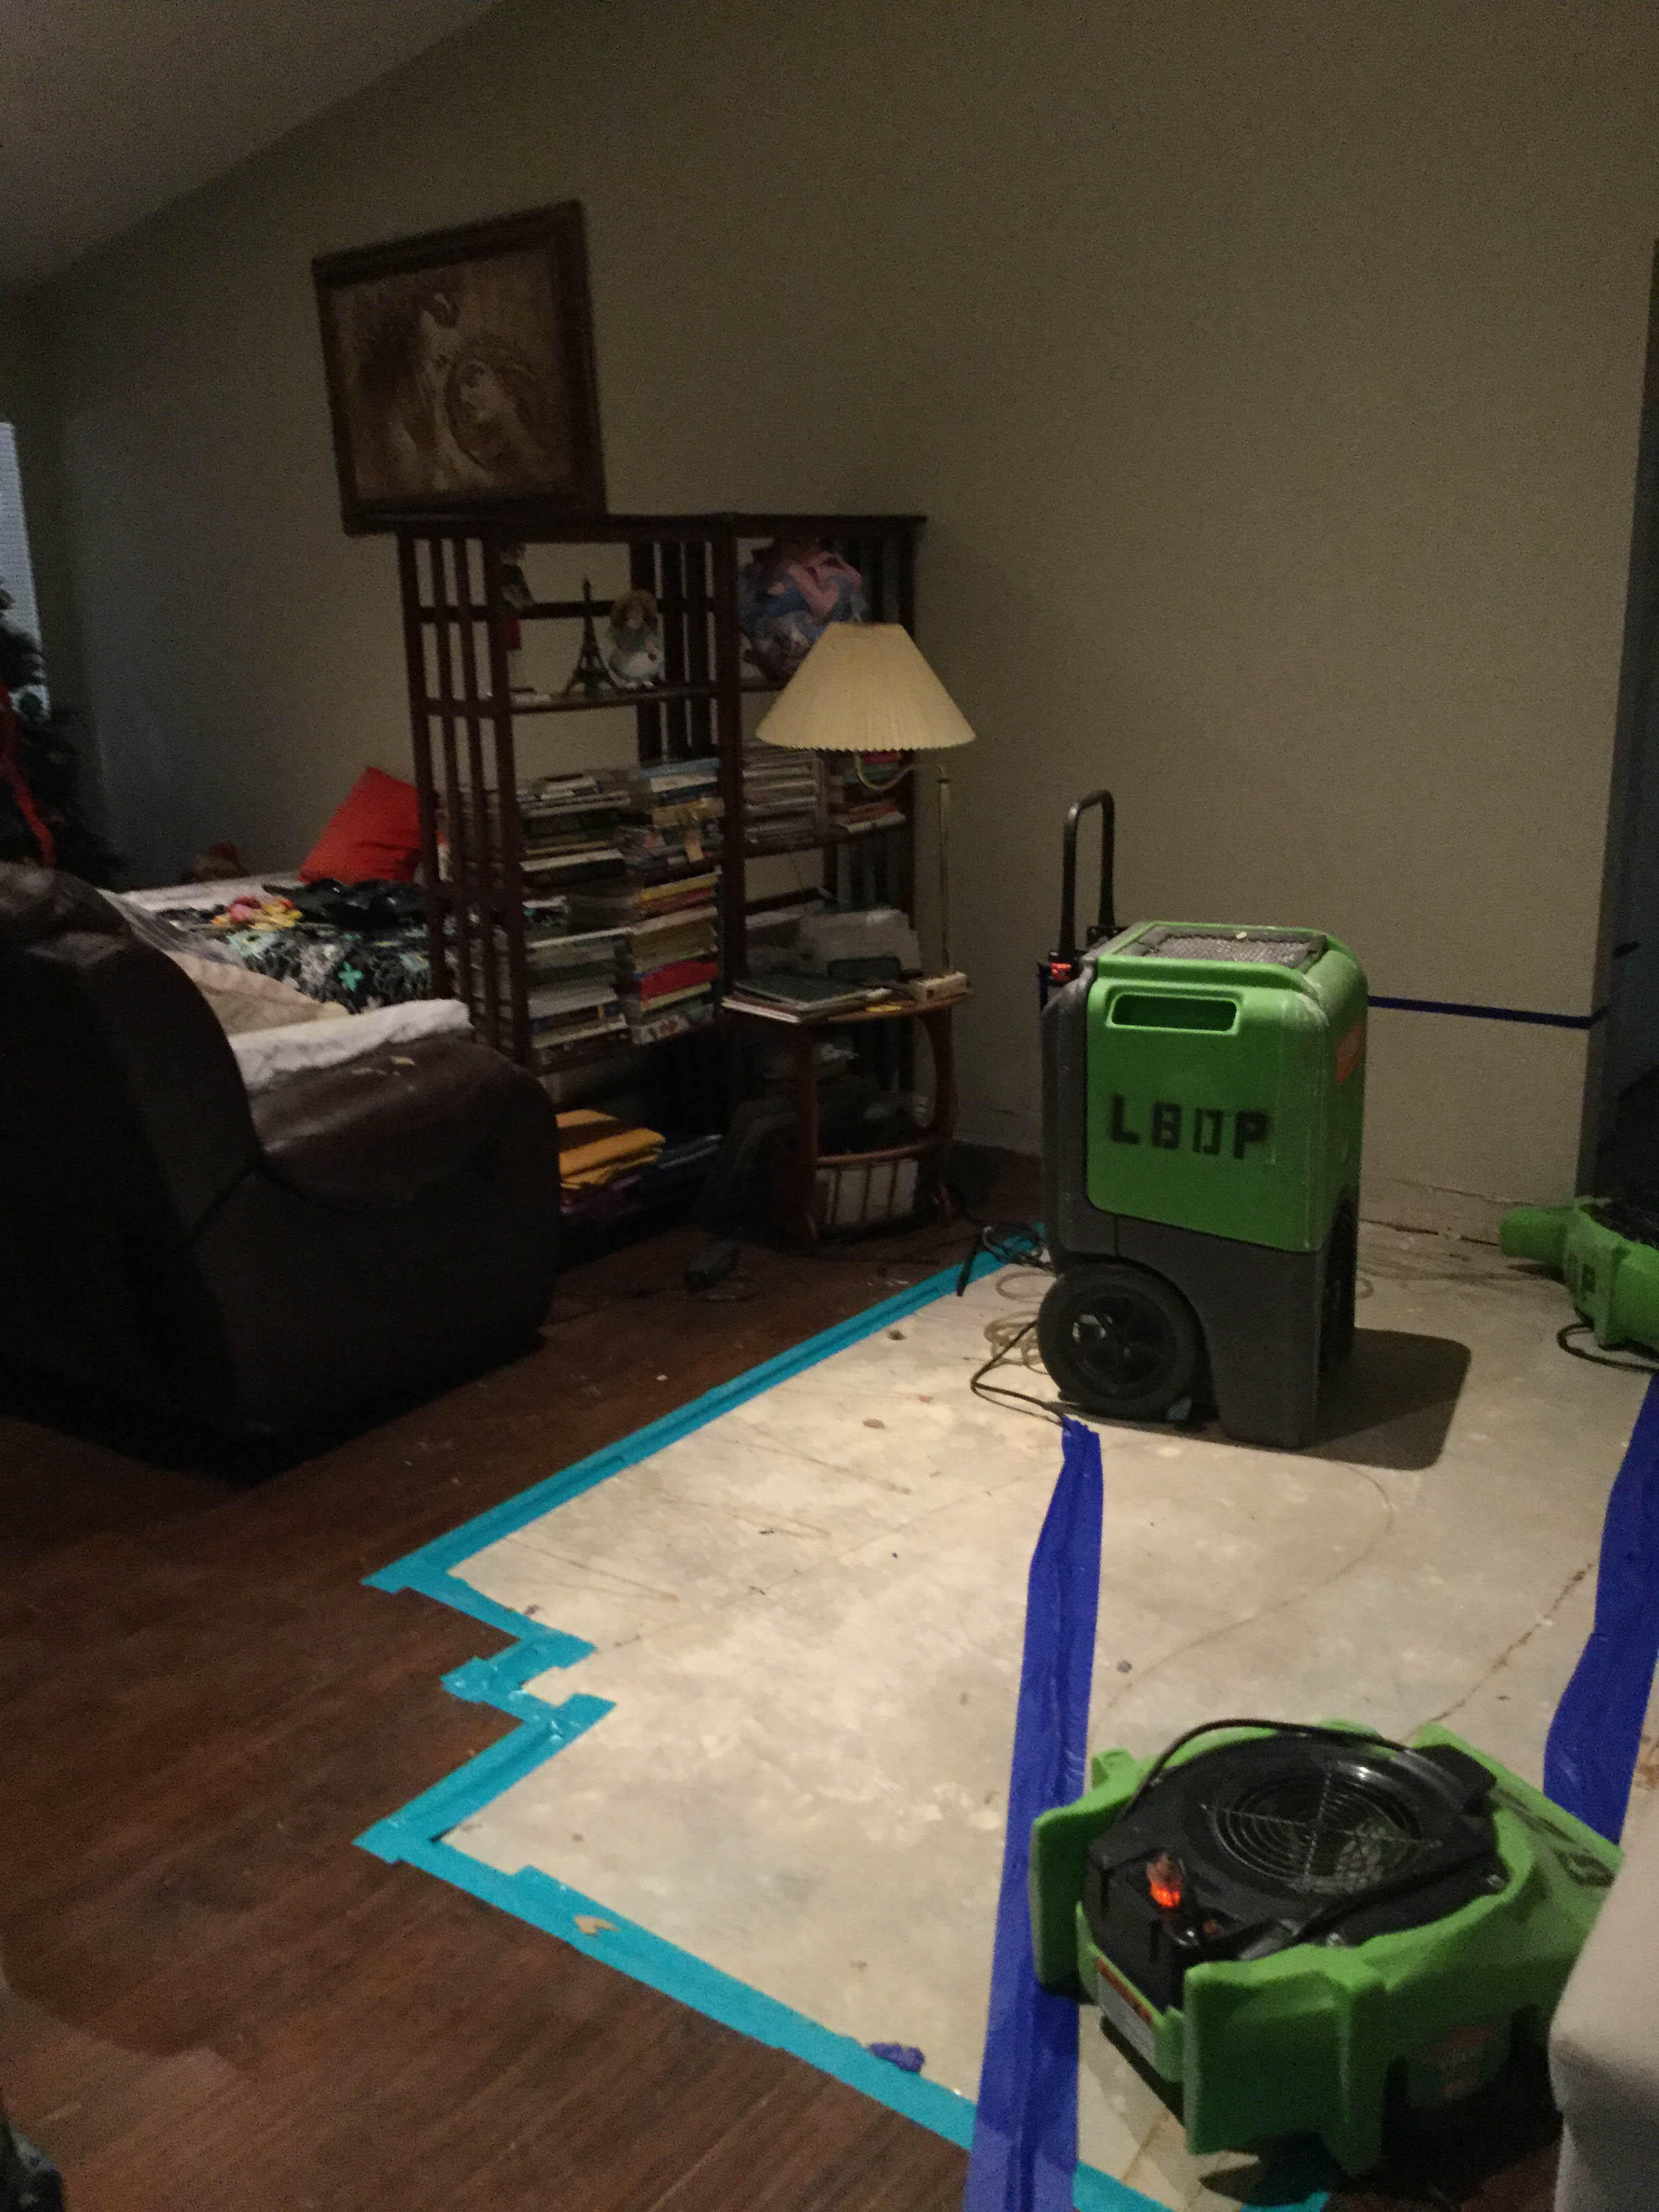 When water damage occurs call SERVPRO of Anaheim West.